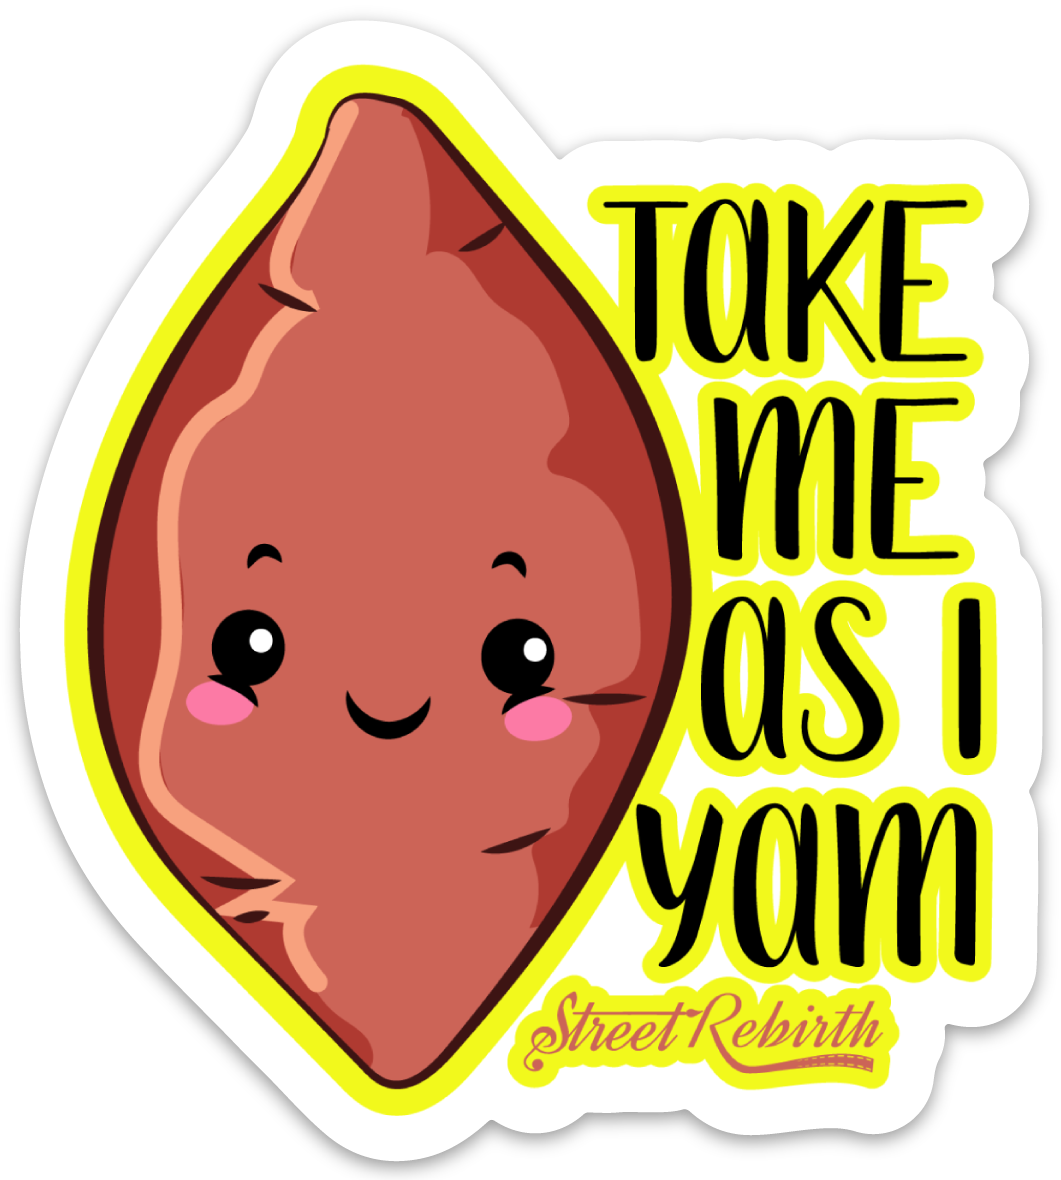 TAKE ME AS I YAM PUN STICKER – ONE 4 INCH WATER PROOF VINYL STICKER – FOR HYDRO FLASK, SKATEBOARD, LAPTOP, PLANNER, CAR, COLLECTING, GIFTING